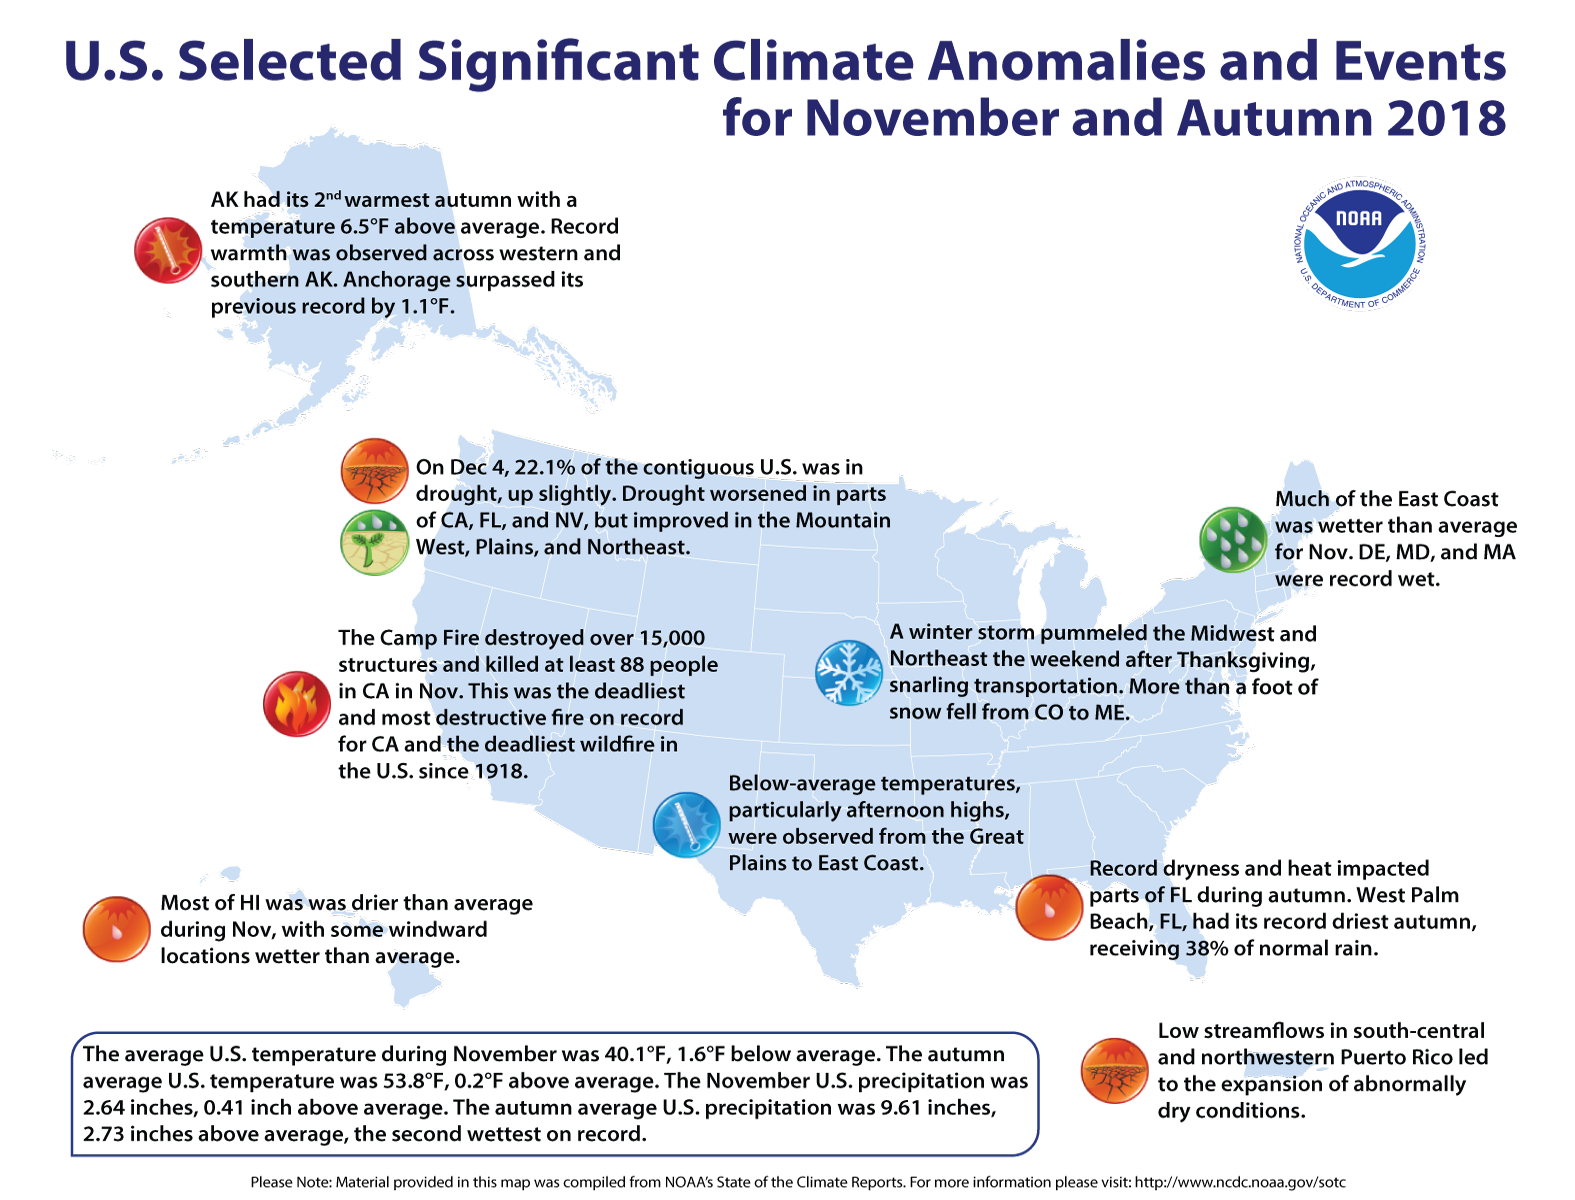 An annotated map of the United States showing notable climate events that occurred across the country in November 2018. For details, see the bulleted list below in the story and online at http://bit.ly/USClimate201811. 